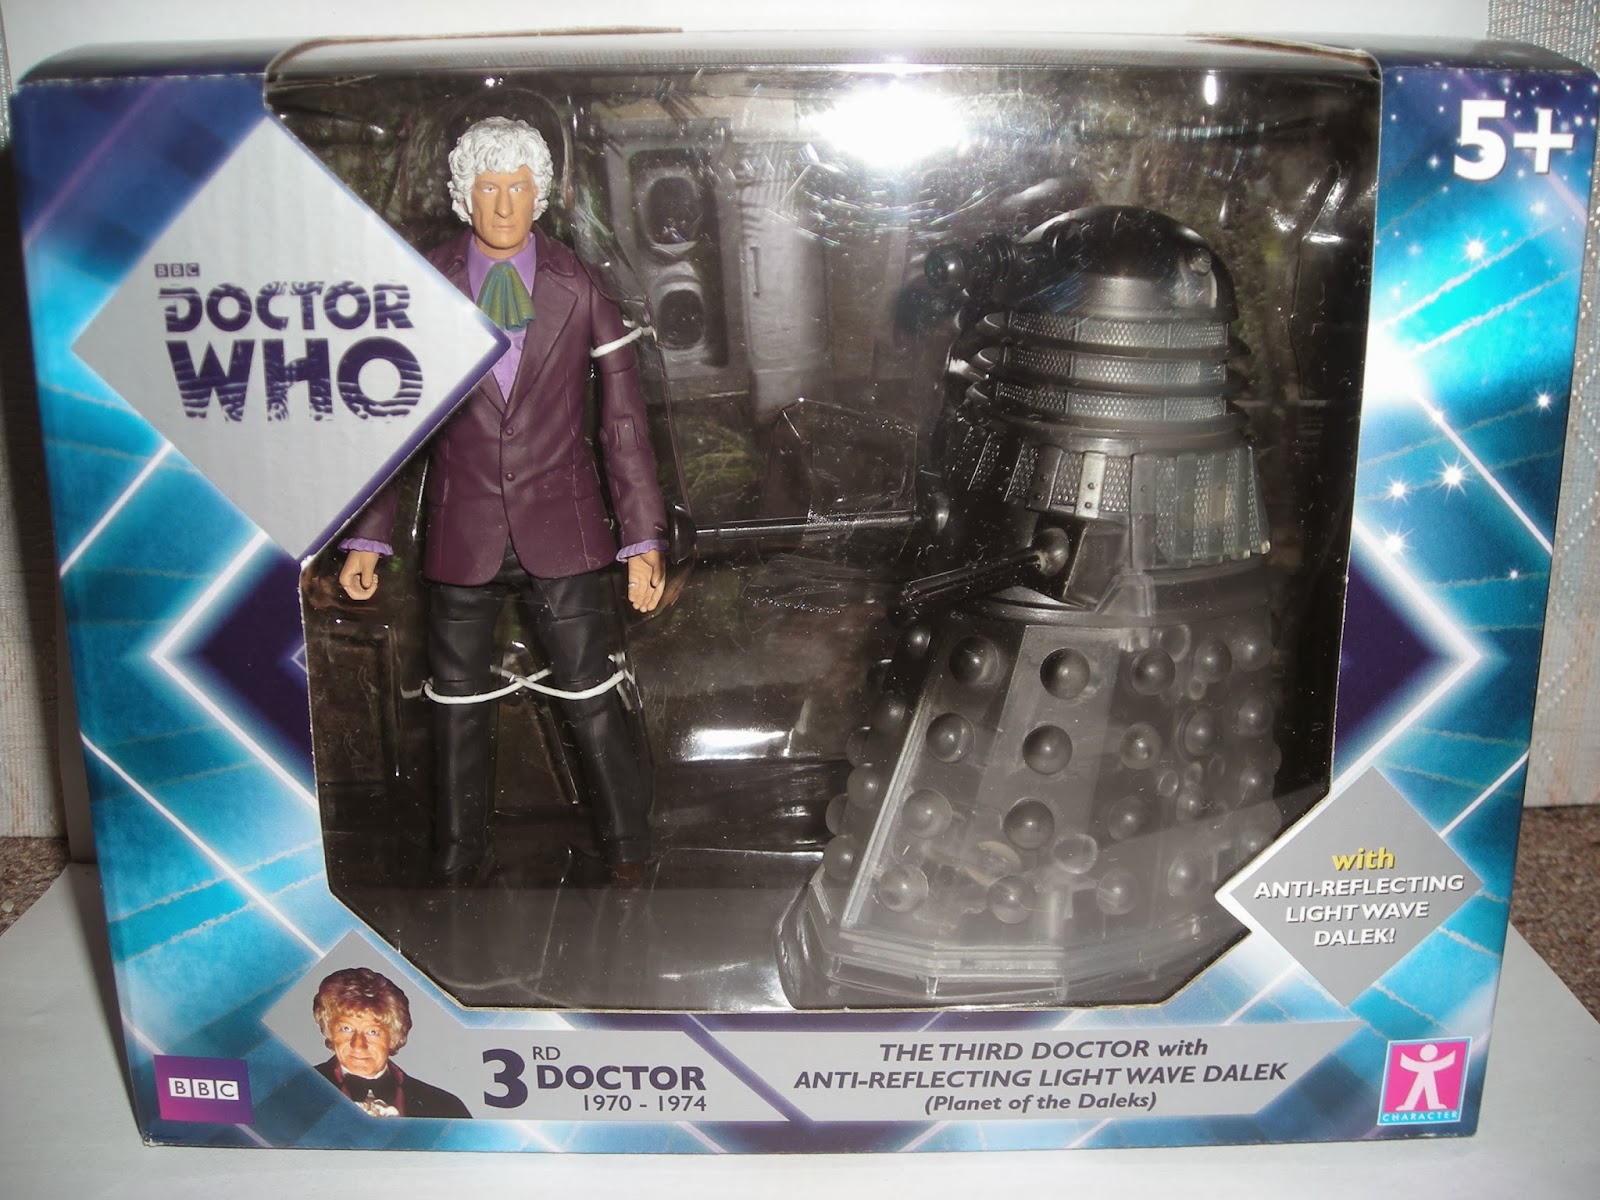 Standard fare Doctor Who packaging